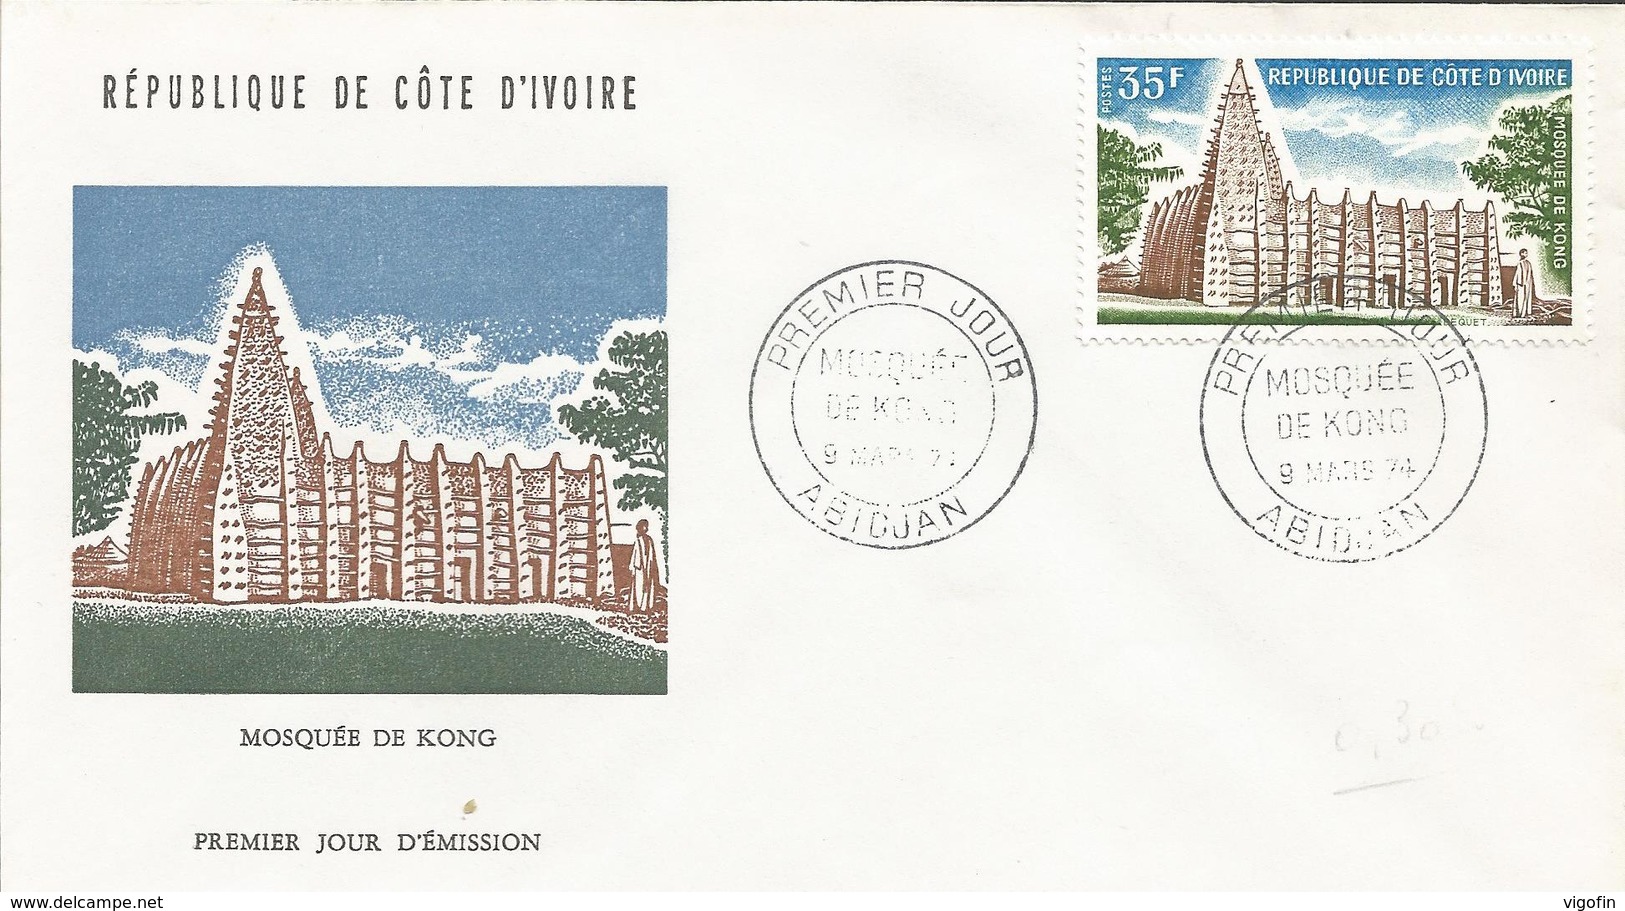 COTE D'IVOIRE MOSQUES, FDC - Islam